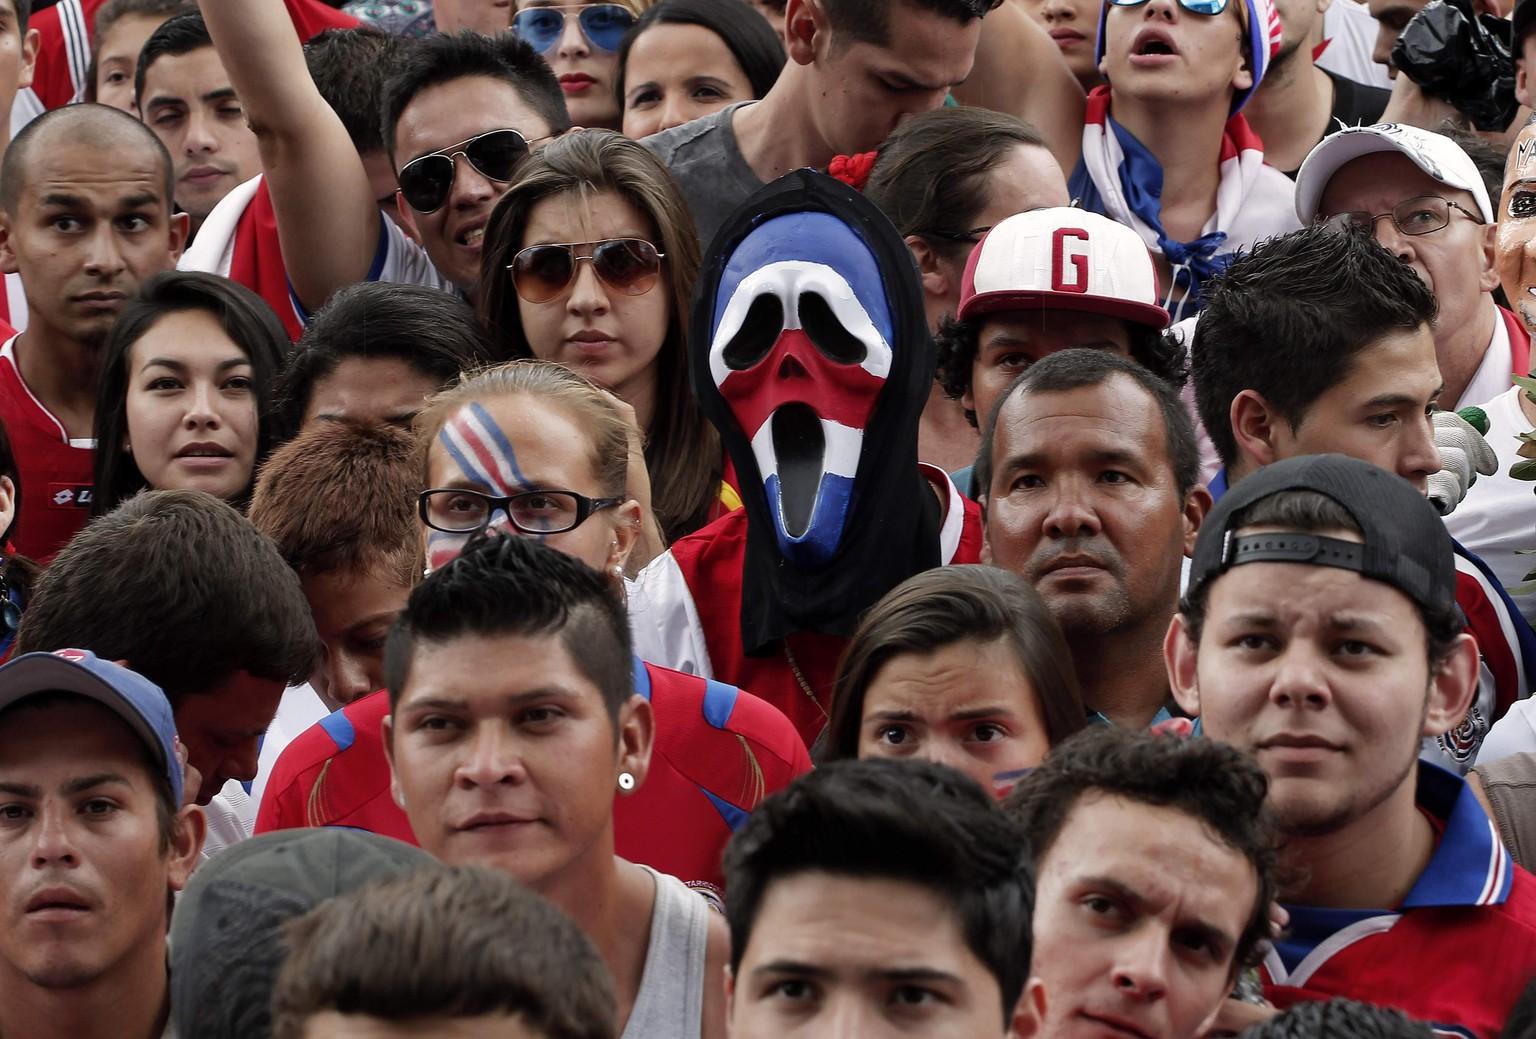 Fans of Costa Rica watch a broadcast of the 2014 World Cup round of 16 game between Costa Rica and Greece, in San Jose June 29, 2014. REUTERS/Juan Carlos Ulate (COSTA RICA - Tags: SPORT SOCCER WORLD C ...